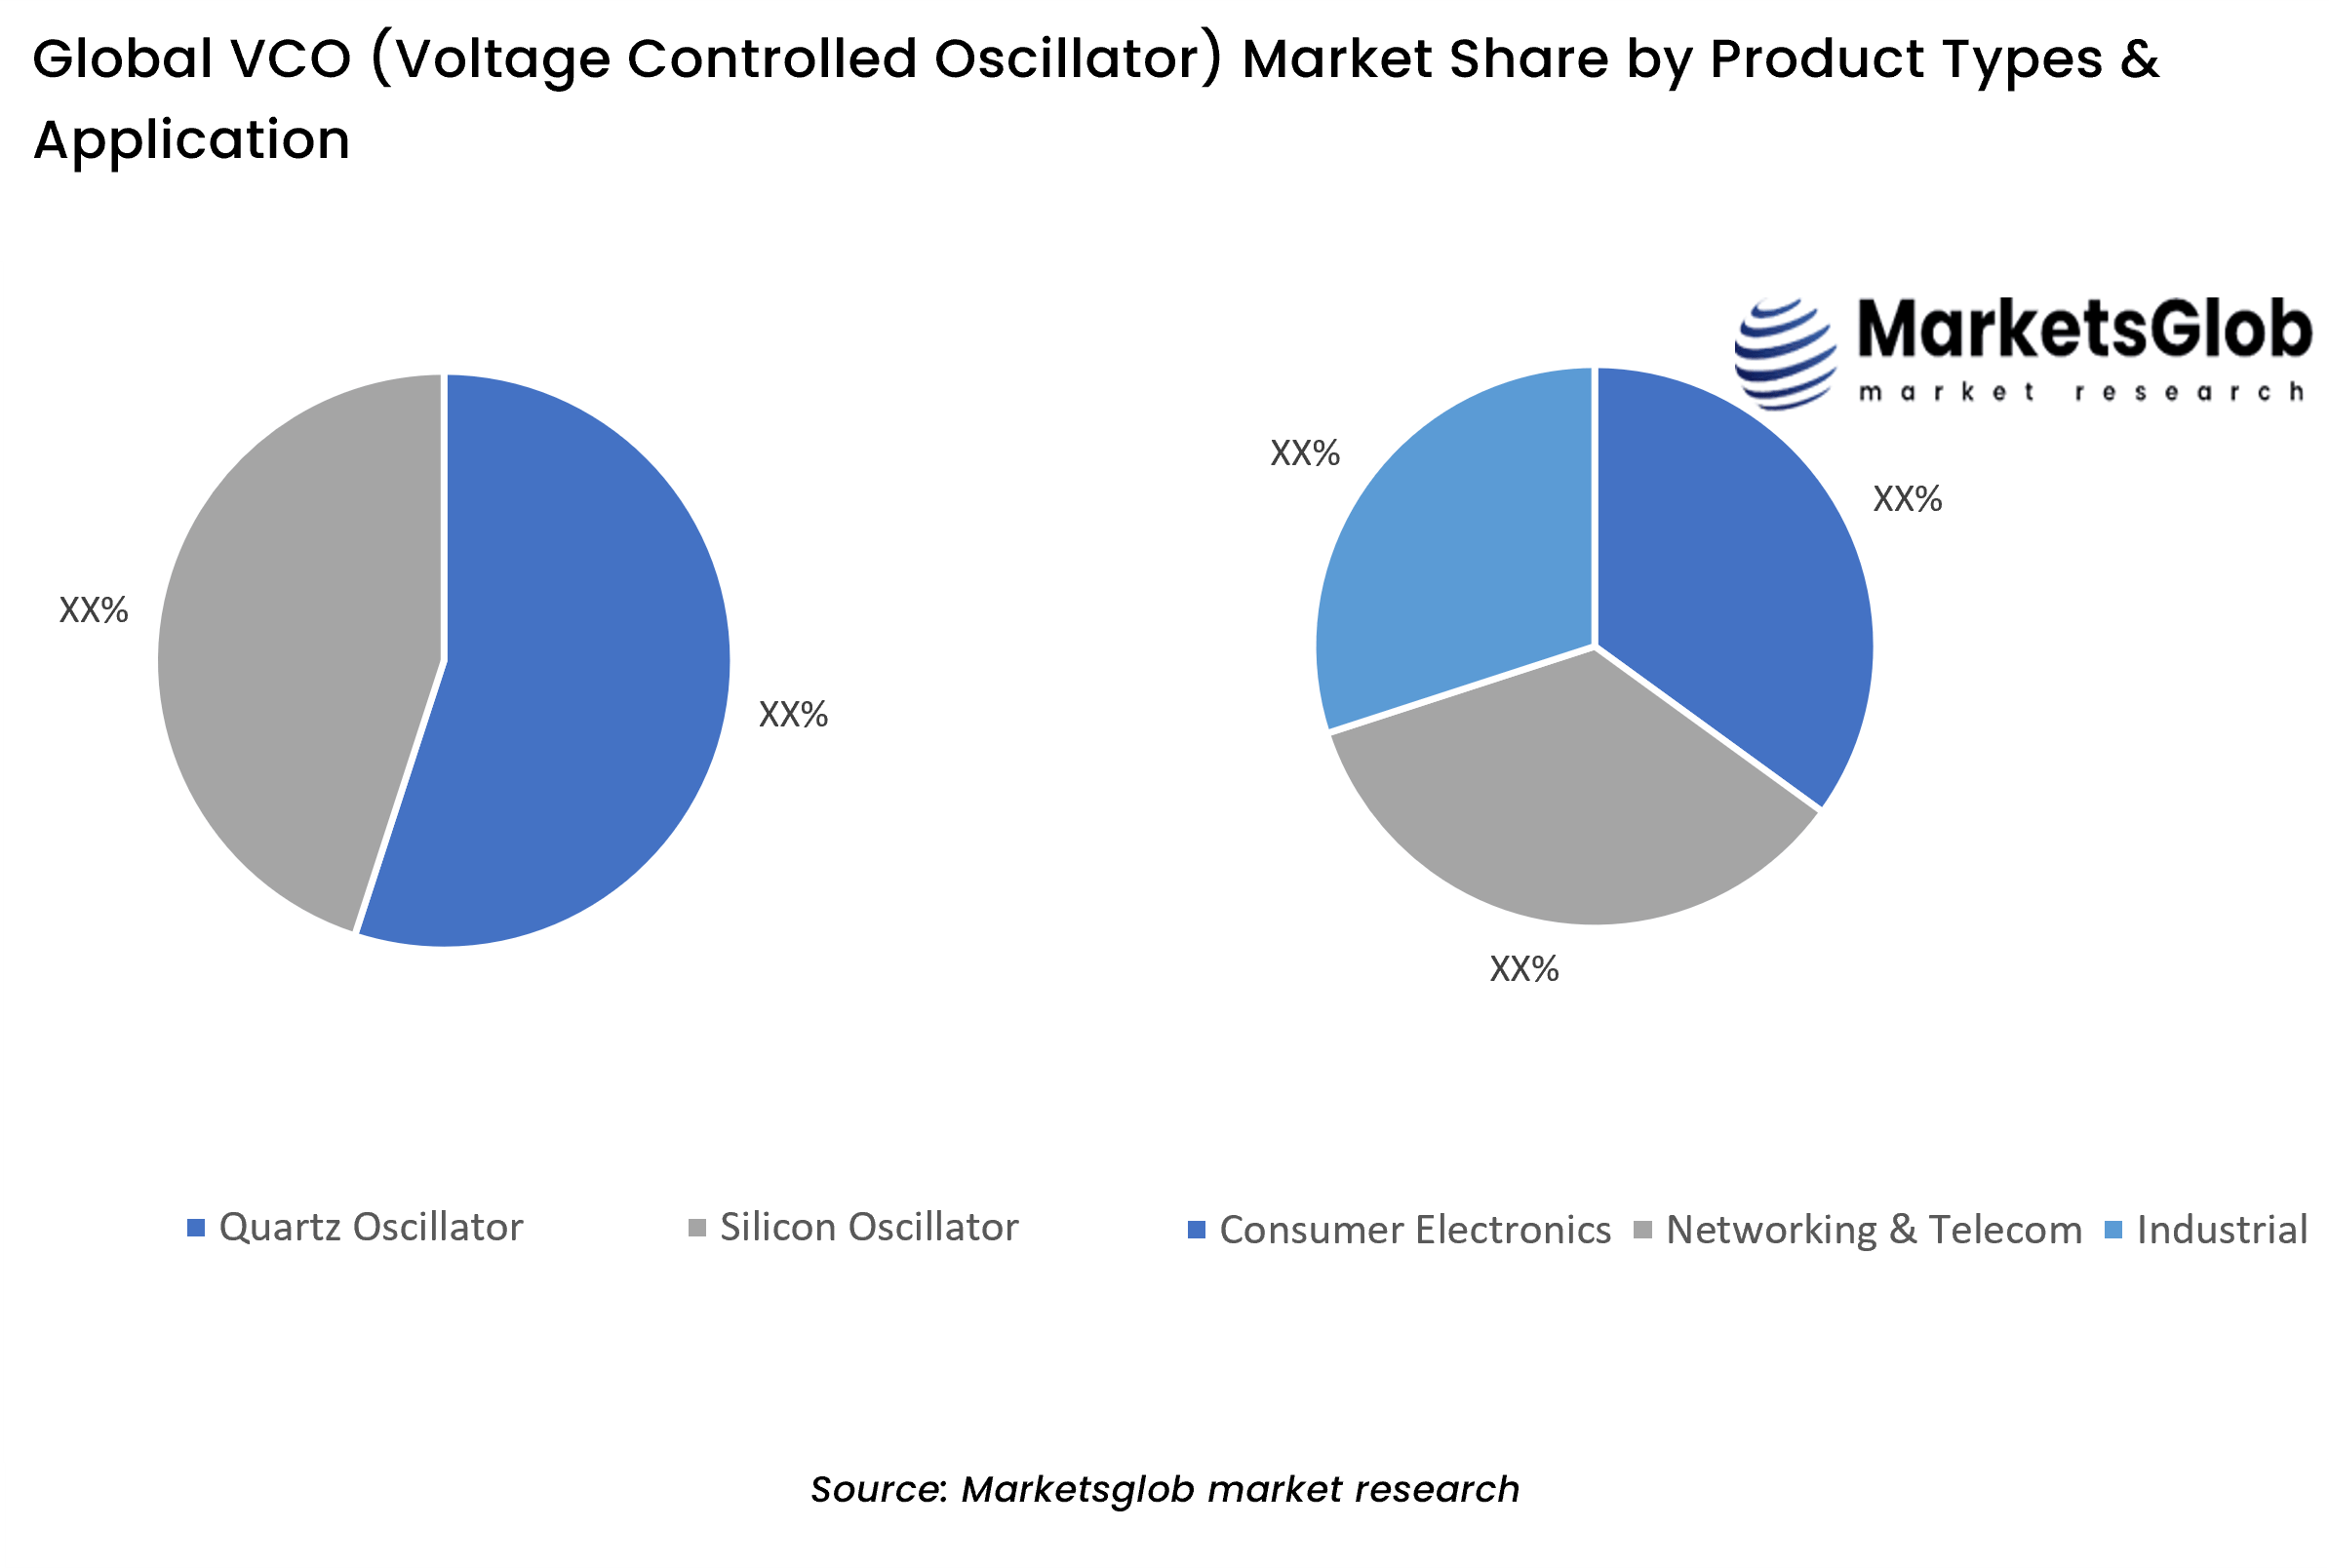 VCO (Voltage Controlled Oscillator) Share by Product Types & Application